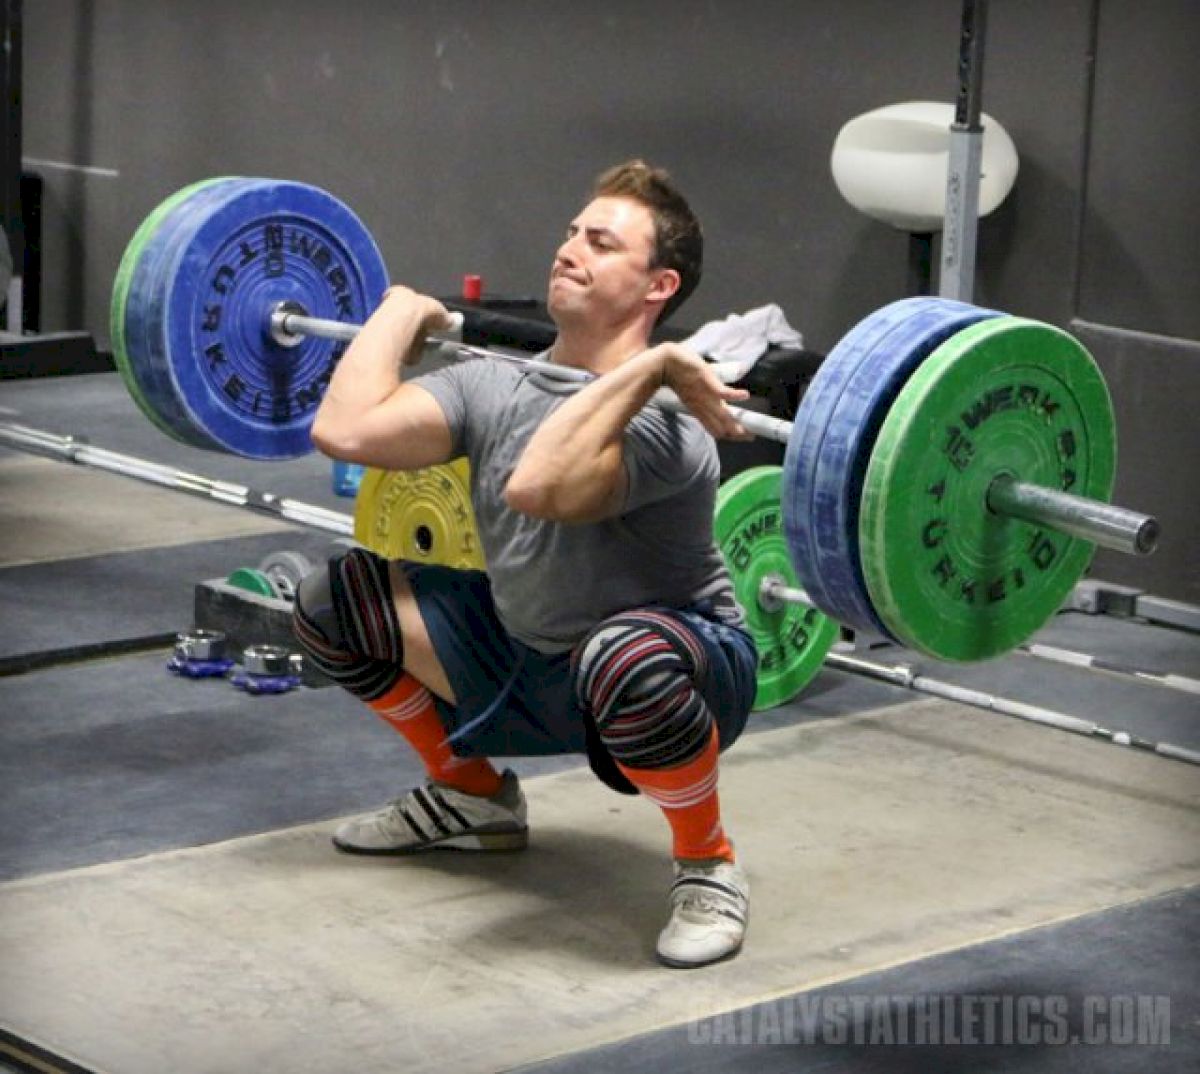 Retaining Balance In The Lift When Increasing Weight 